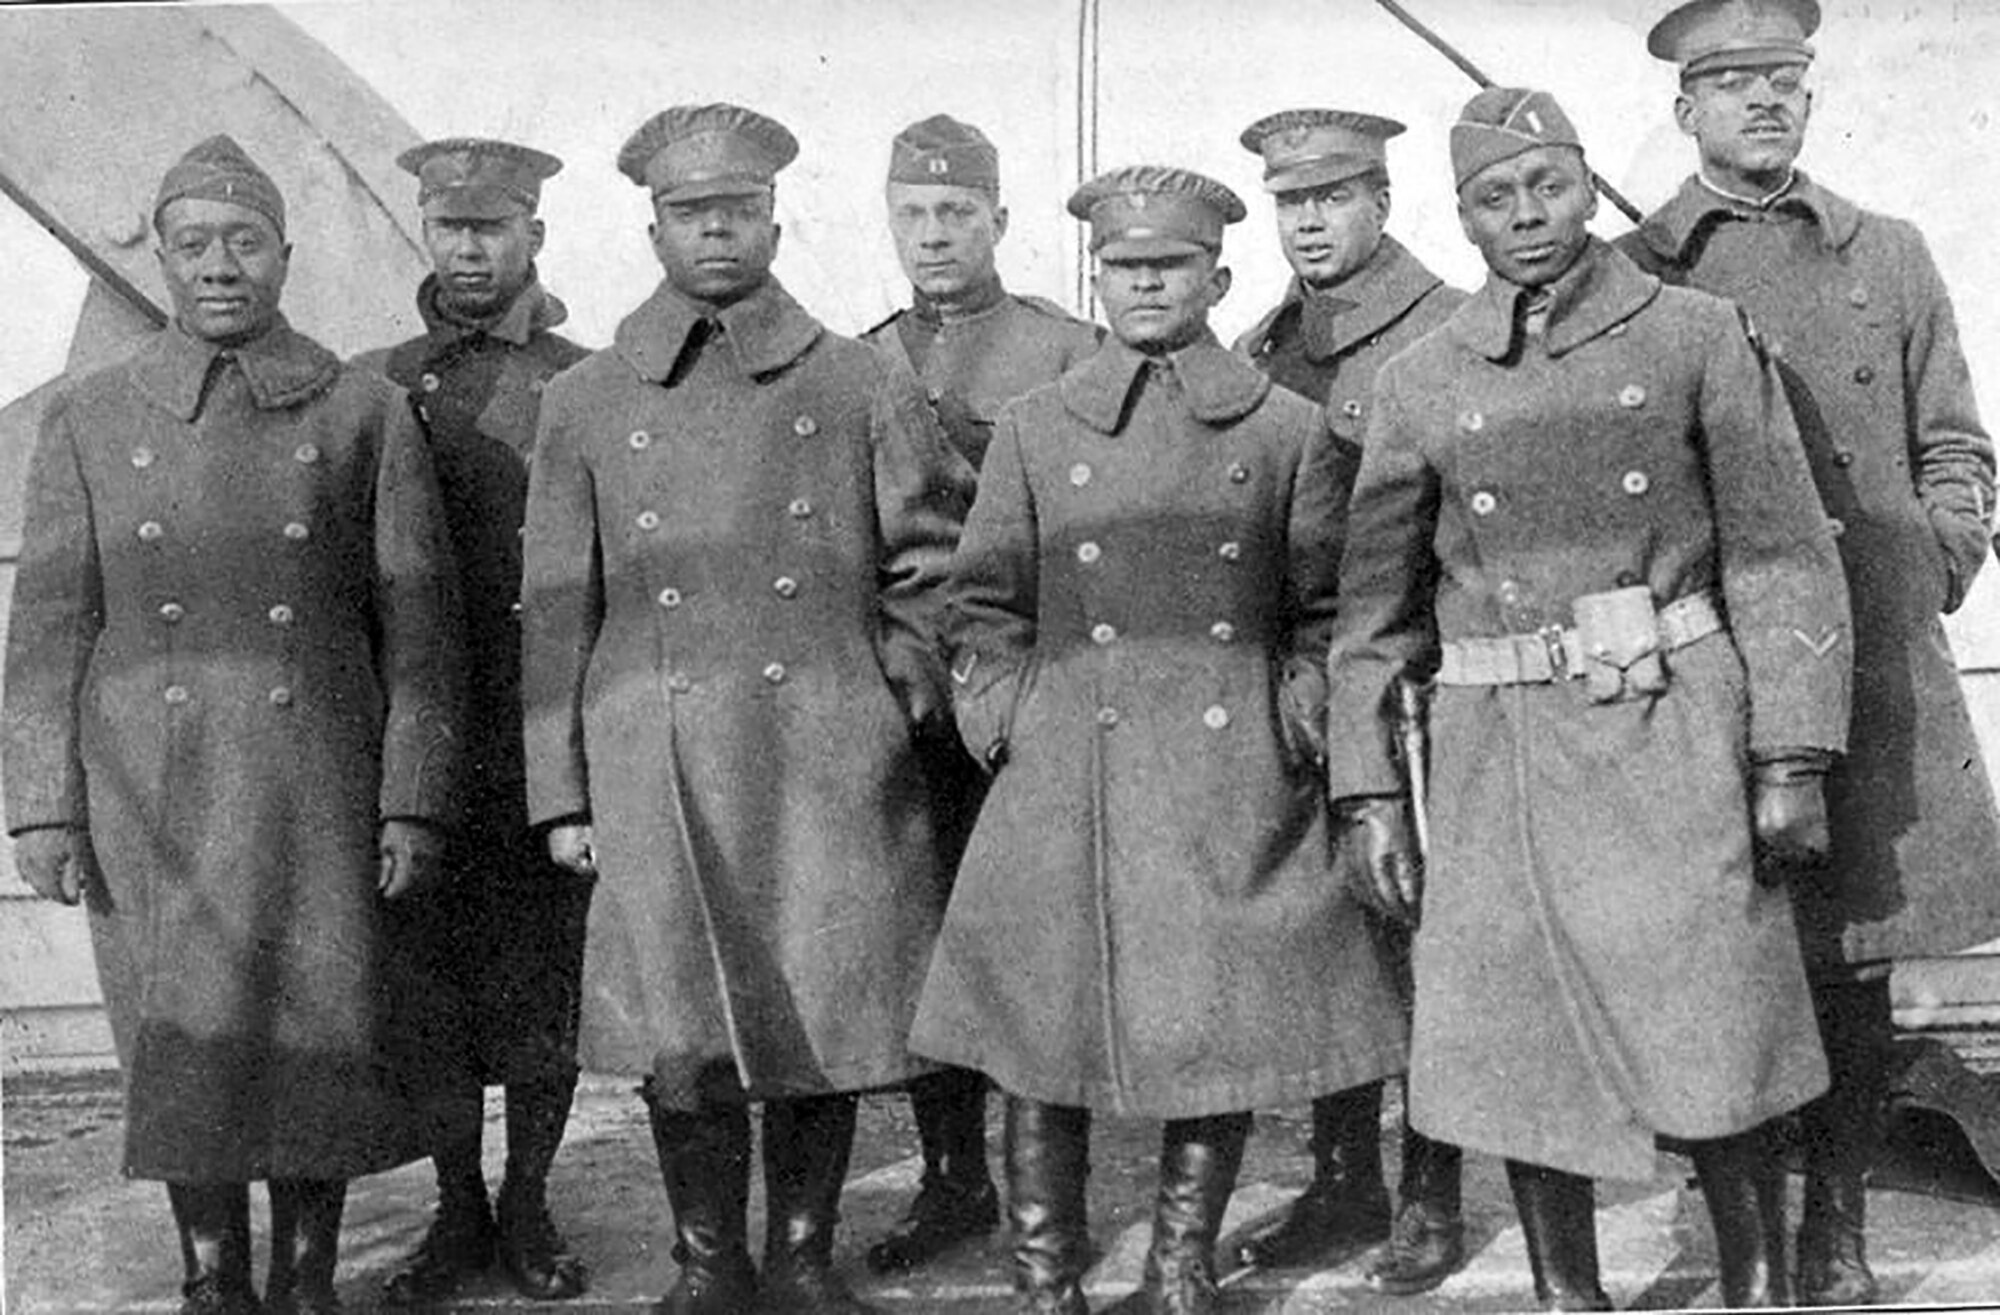 Officers of the 370th (Old 8th Illinois) on the deck of the La France IV before landing in New York City. From left are 2nd Lt. Lawson Price; 2nd Lt. L. W. Stearls; 2nd Lt. Ed. White; 2nd Lt. Eli F. E. Williams; 1st Lt. Oasola Browning; Capt. Louis B. Johnson; 1st Lt. Frank Bates; 1st Lt. Binga Desmond.